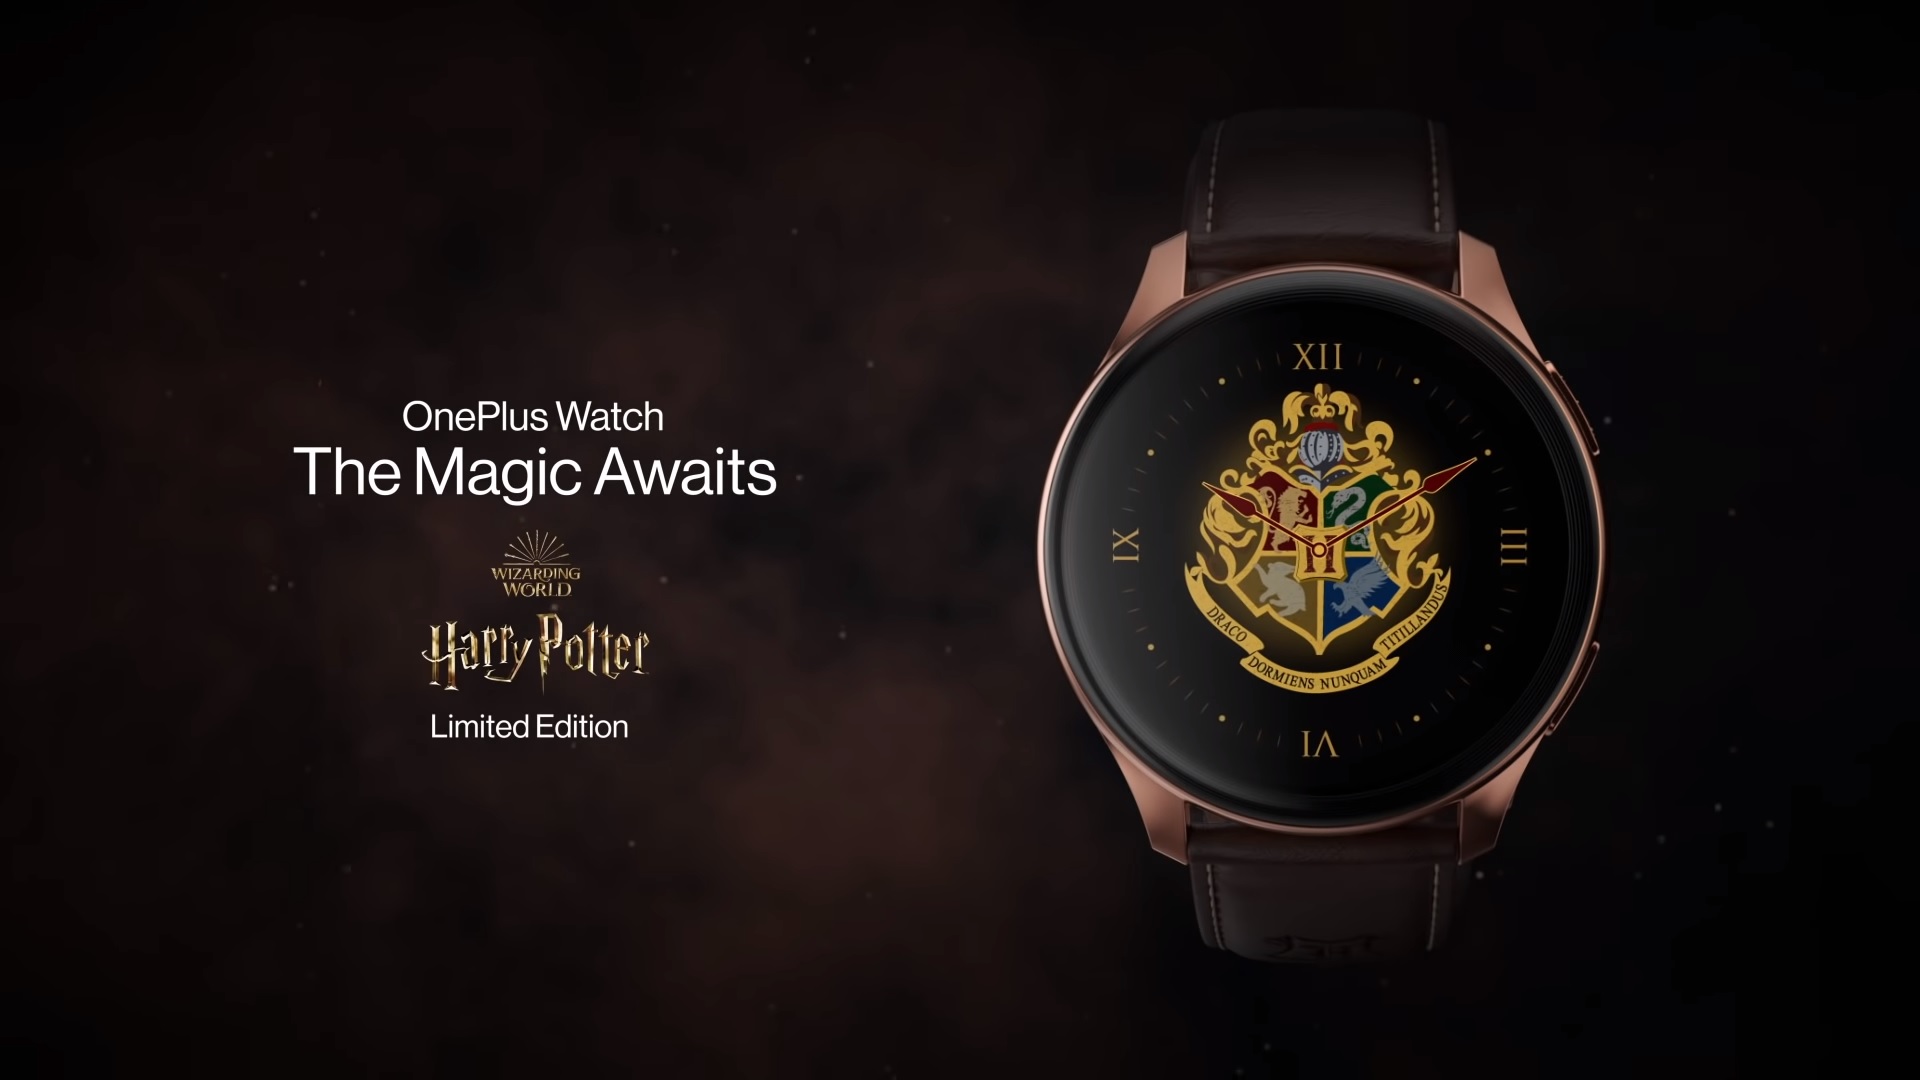 OnePlus Watch Harry Potter Limited Edition smartwatch